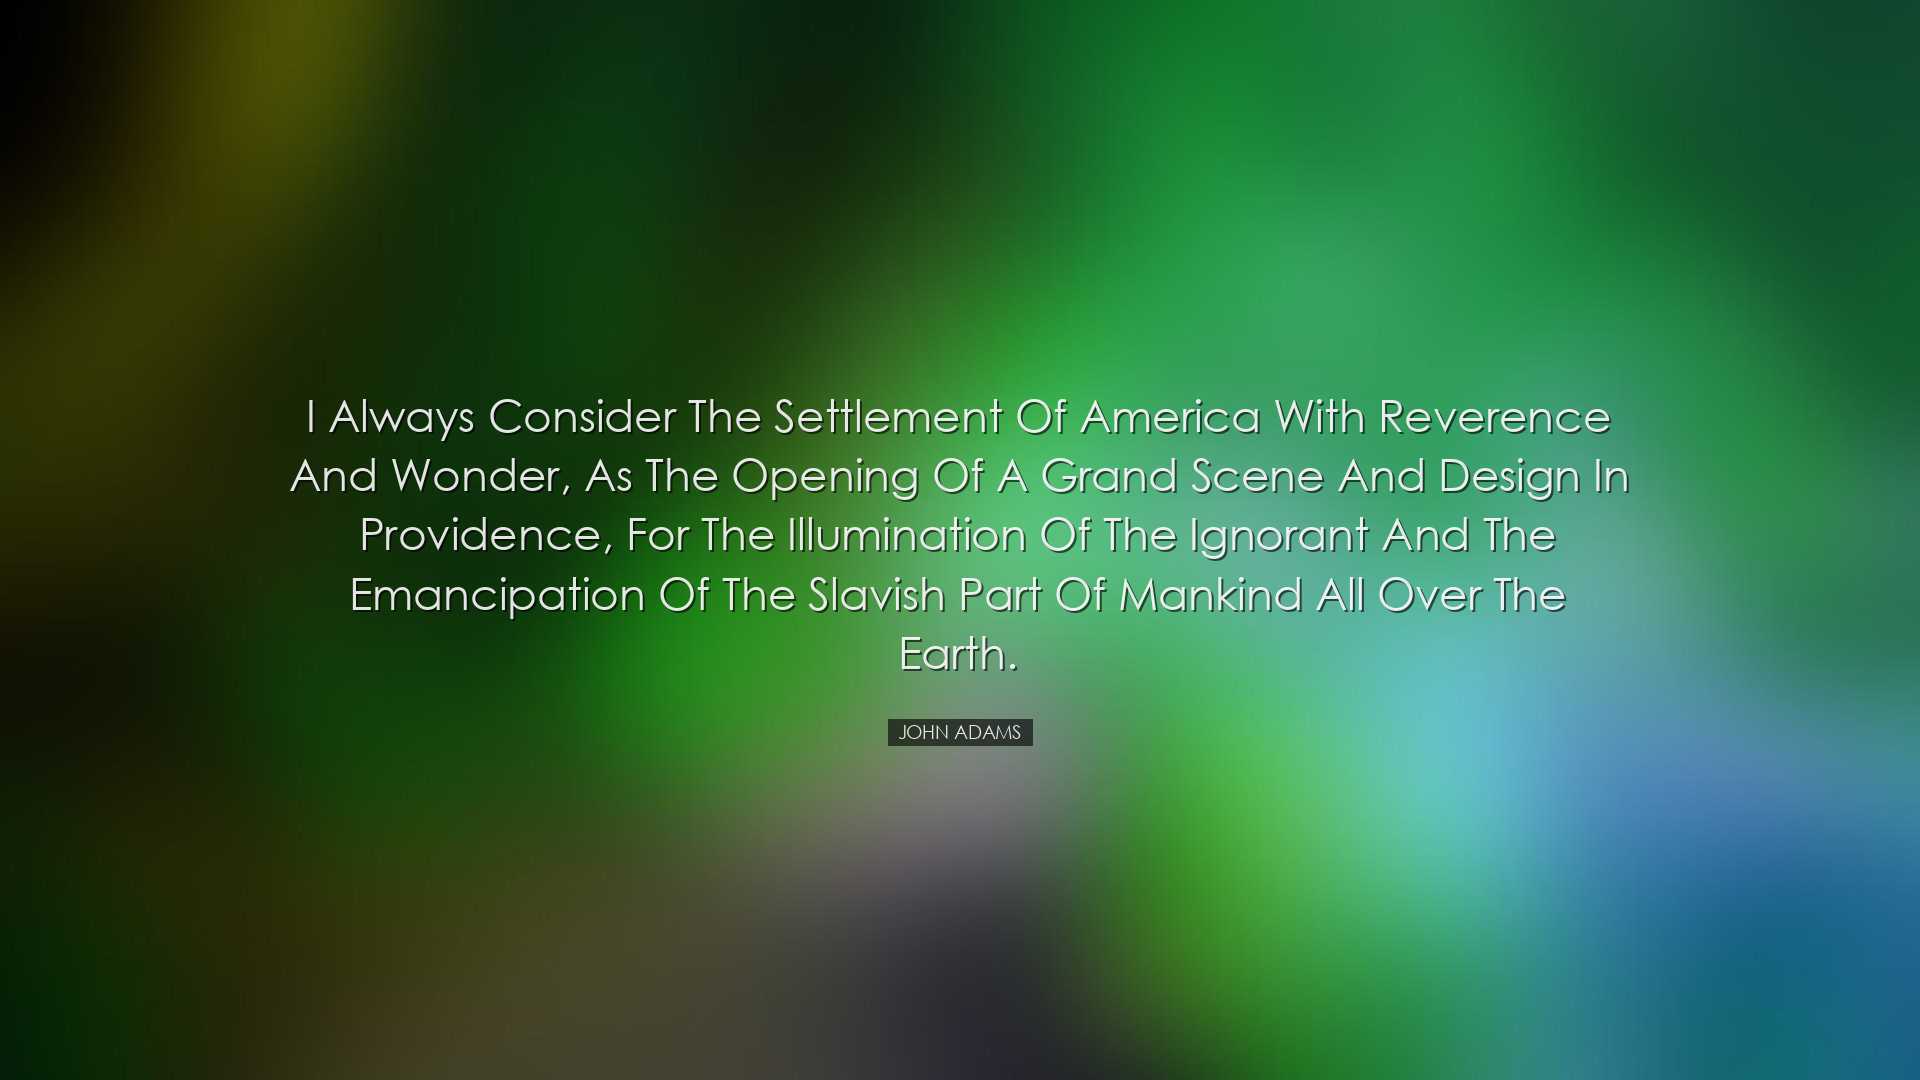 I always consider the settlement of America with reverence and won